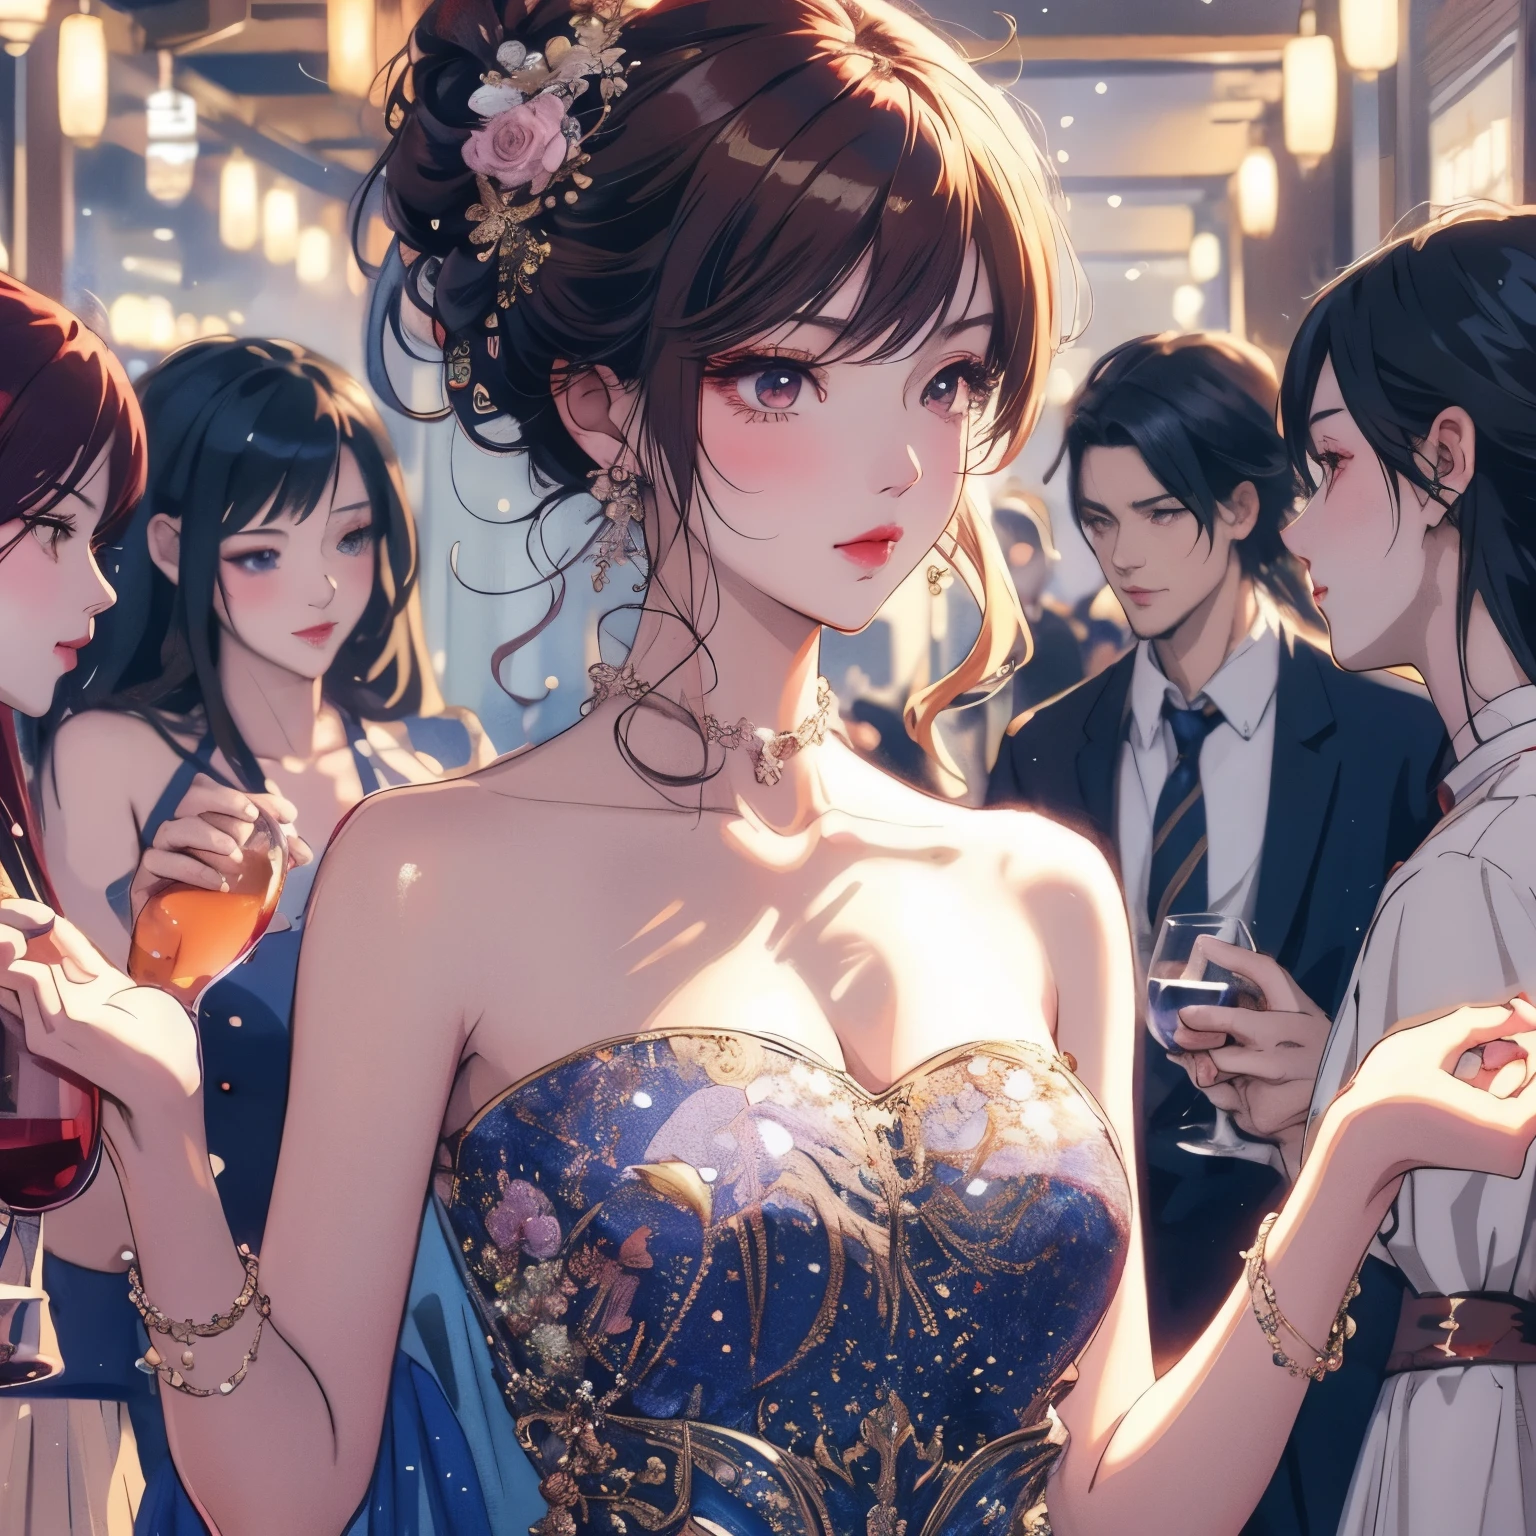 anime girl in a sequinous dress holding a glass of wine, smooth anime cg art, detailed digital anime art, artwork in the style of guweiz, guweiz, digital anime illustration, trending on cgstation, beautiful anime art style, digital anime art, beautiful anime girl, beautiful anime woman, cute anime waifu in a nice dress